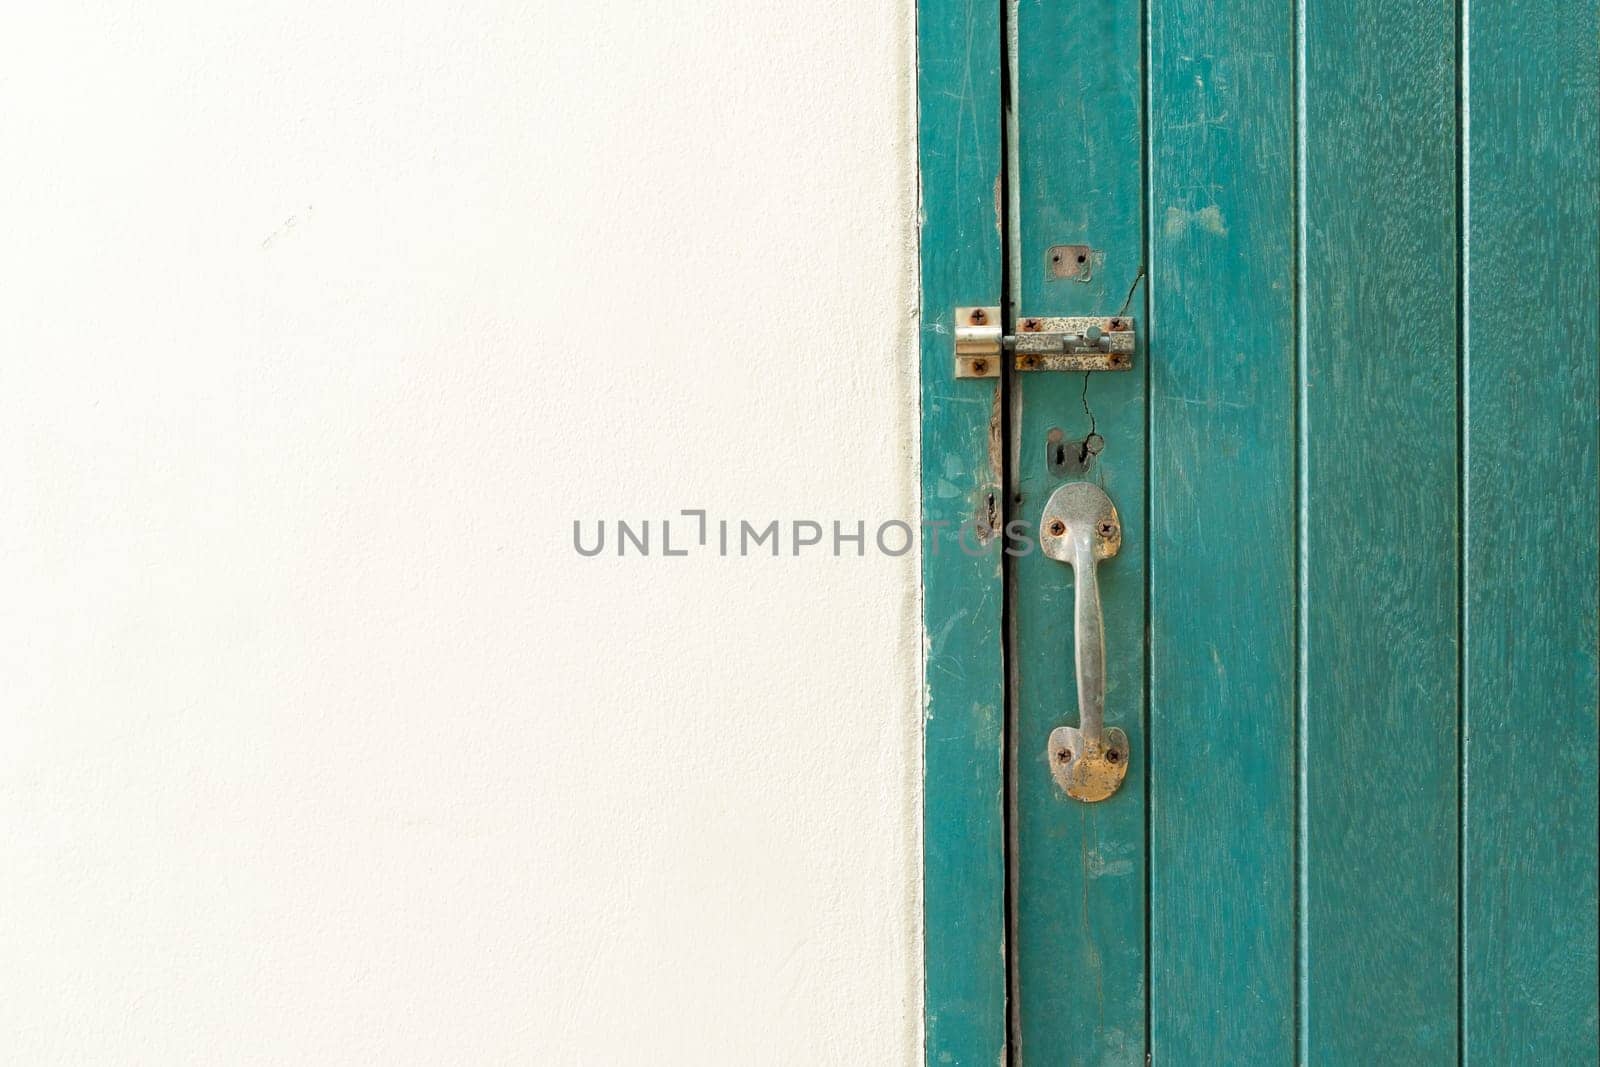 The Closed padlock hangs on the green color wooden door and wall. by Gamjai